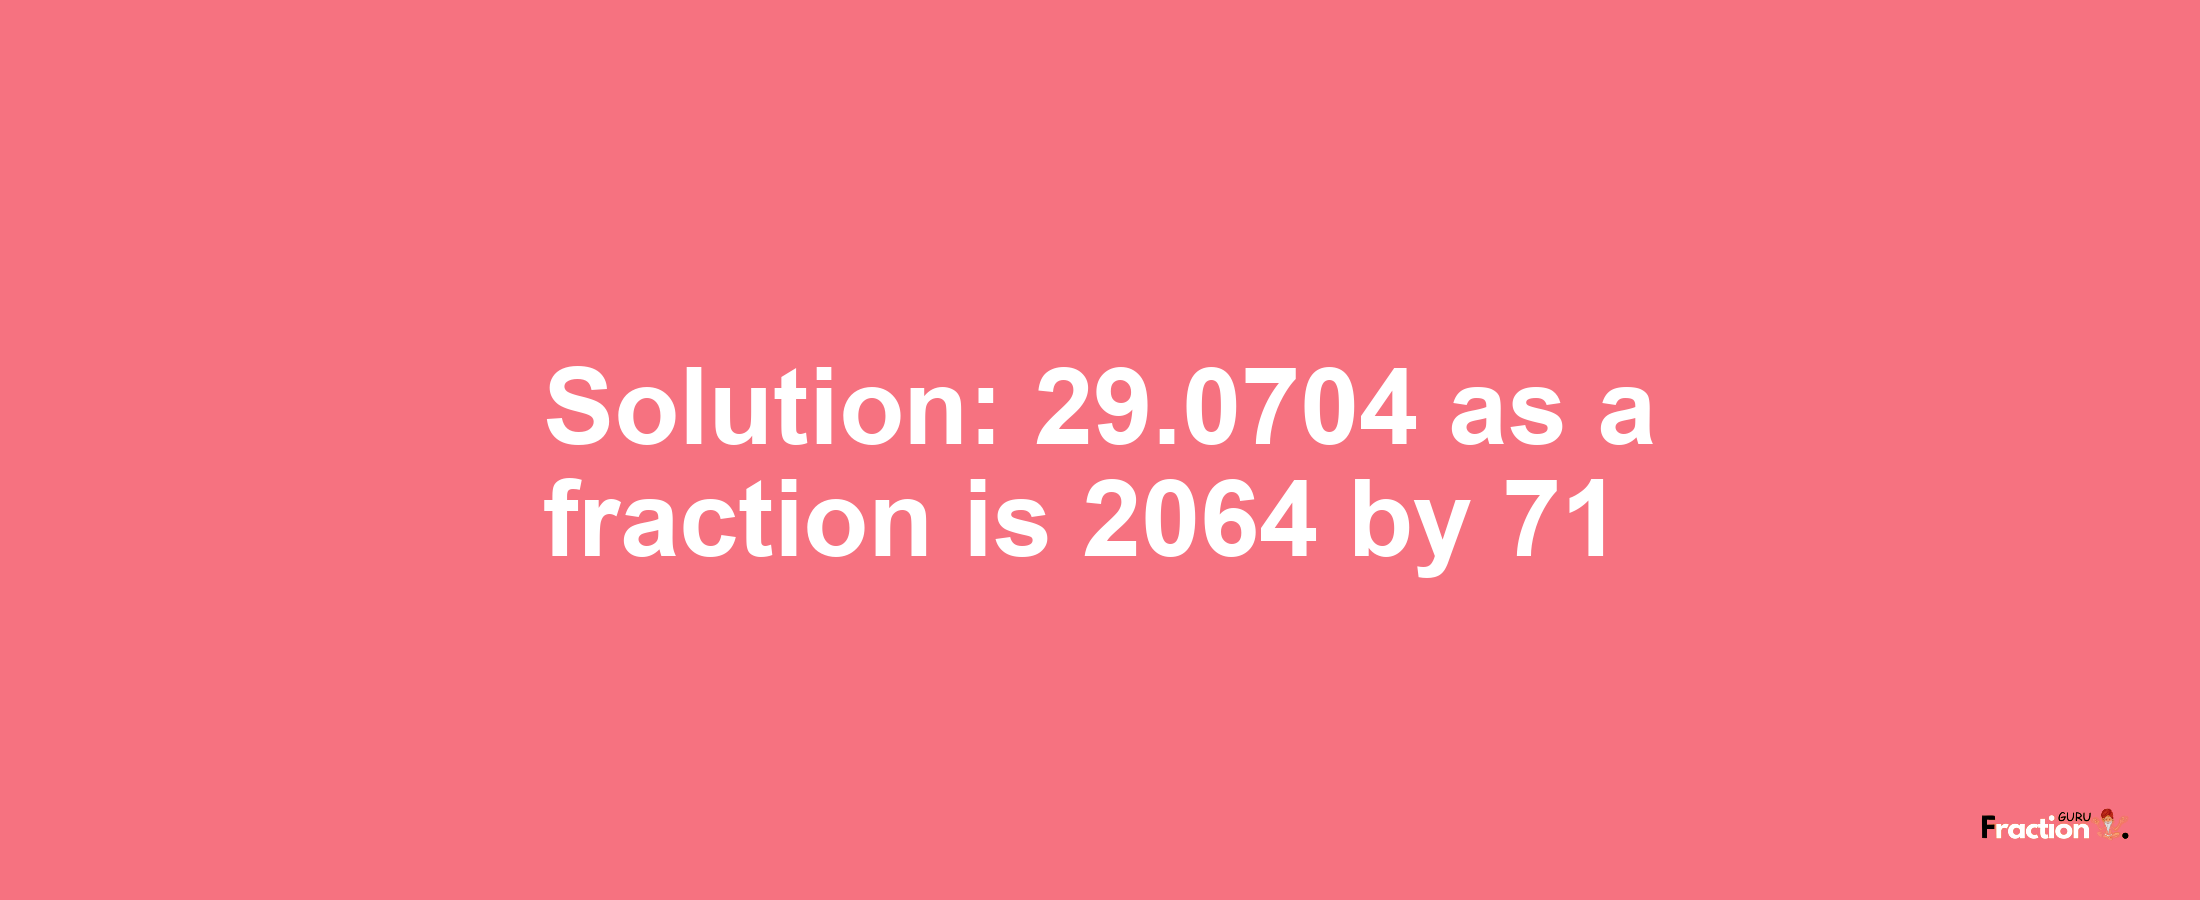 Solution:29.0704 as a fraction is 2064/71